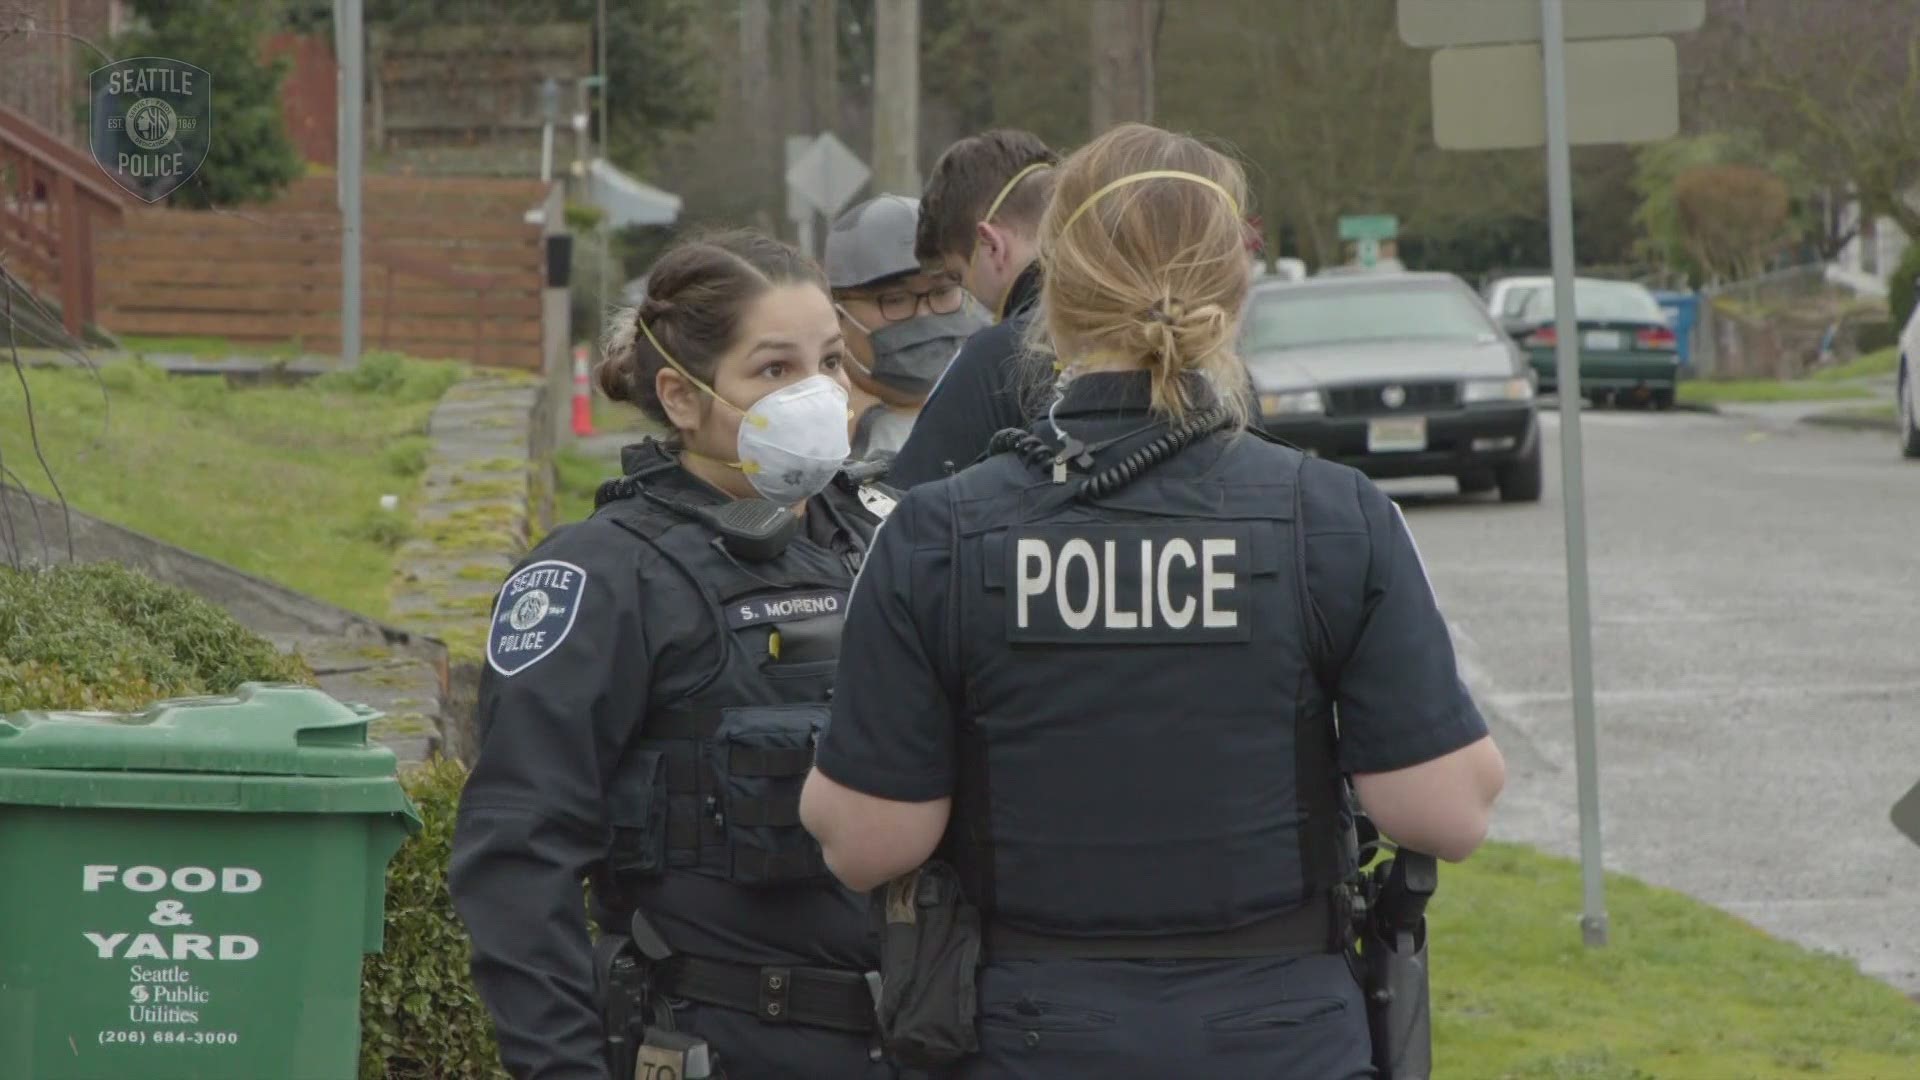 A difficult year lead to a mass exodus at the Seattle Police Department.  Now young officers with fresh ideas are helping change policies to improve relations.